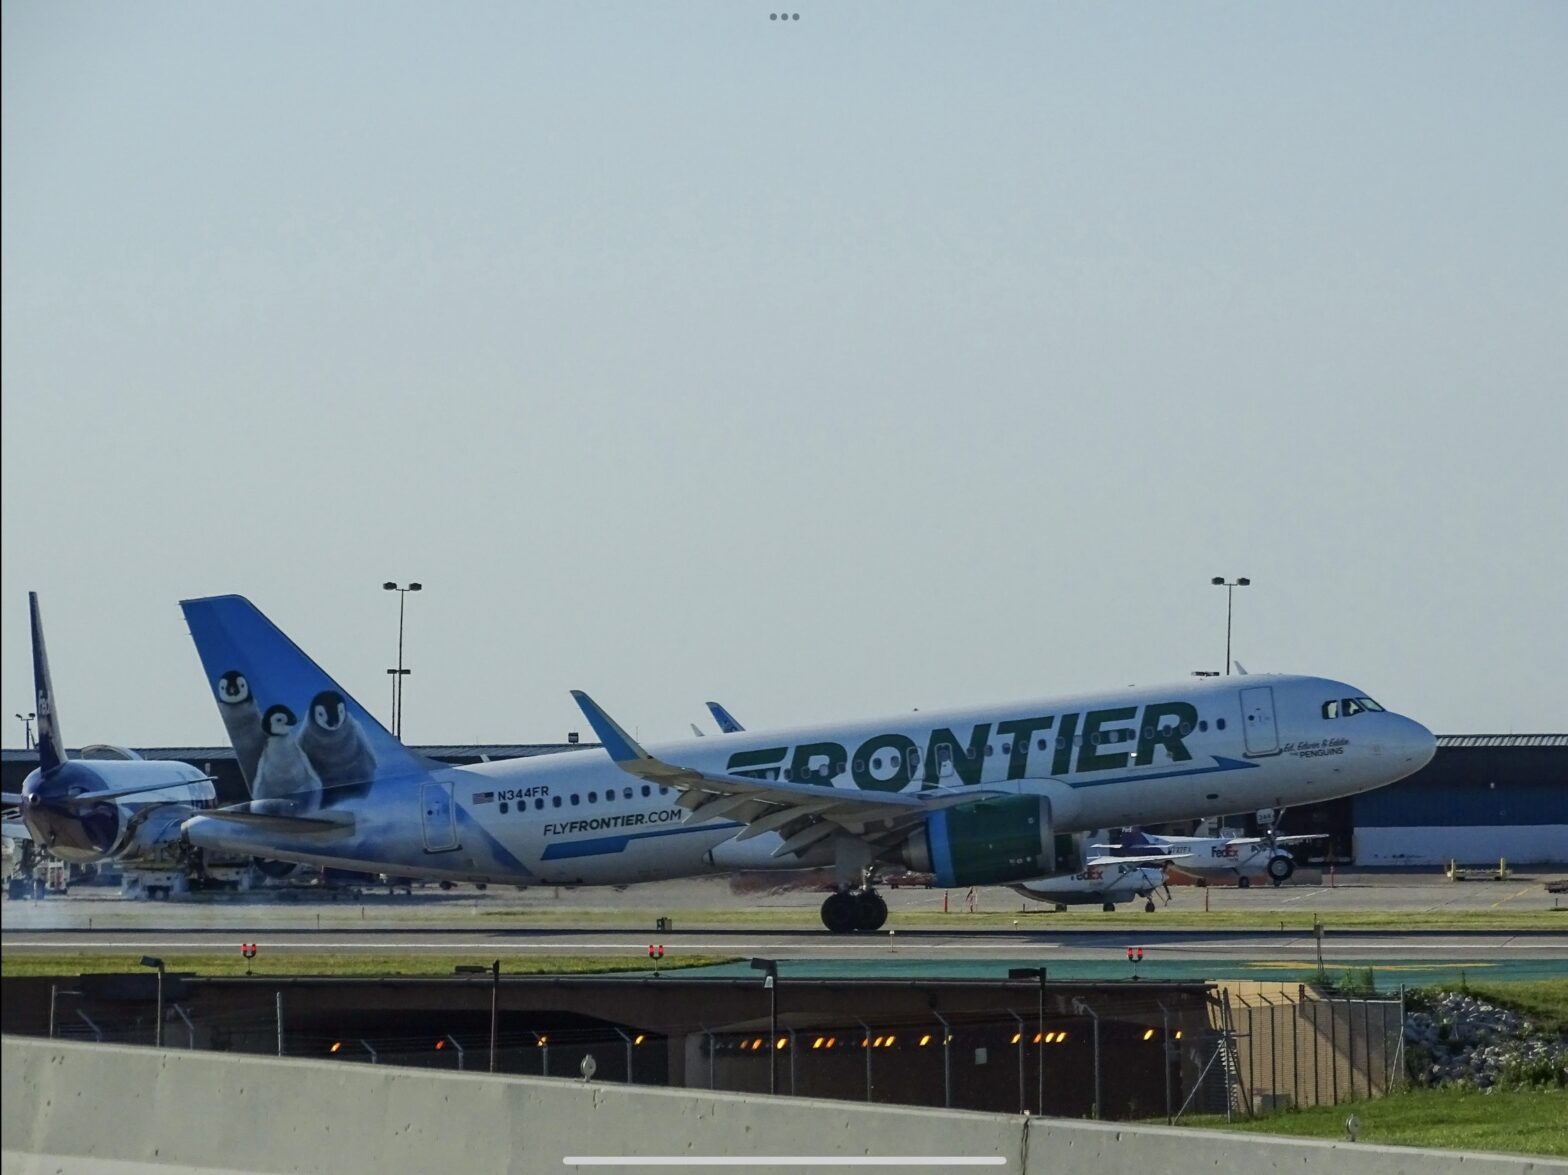 Is Frontier Airlines Safe?